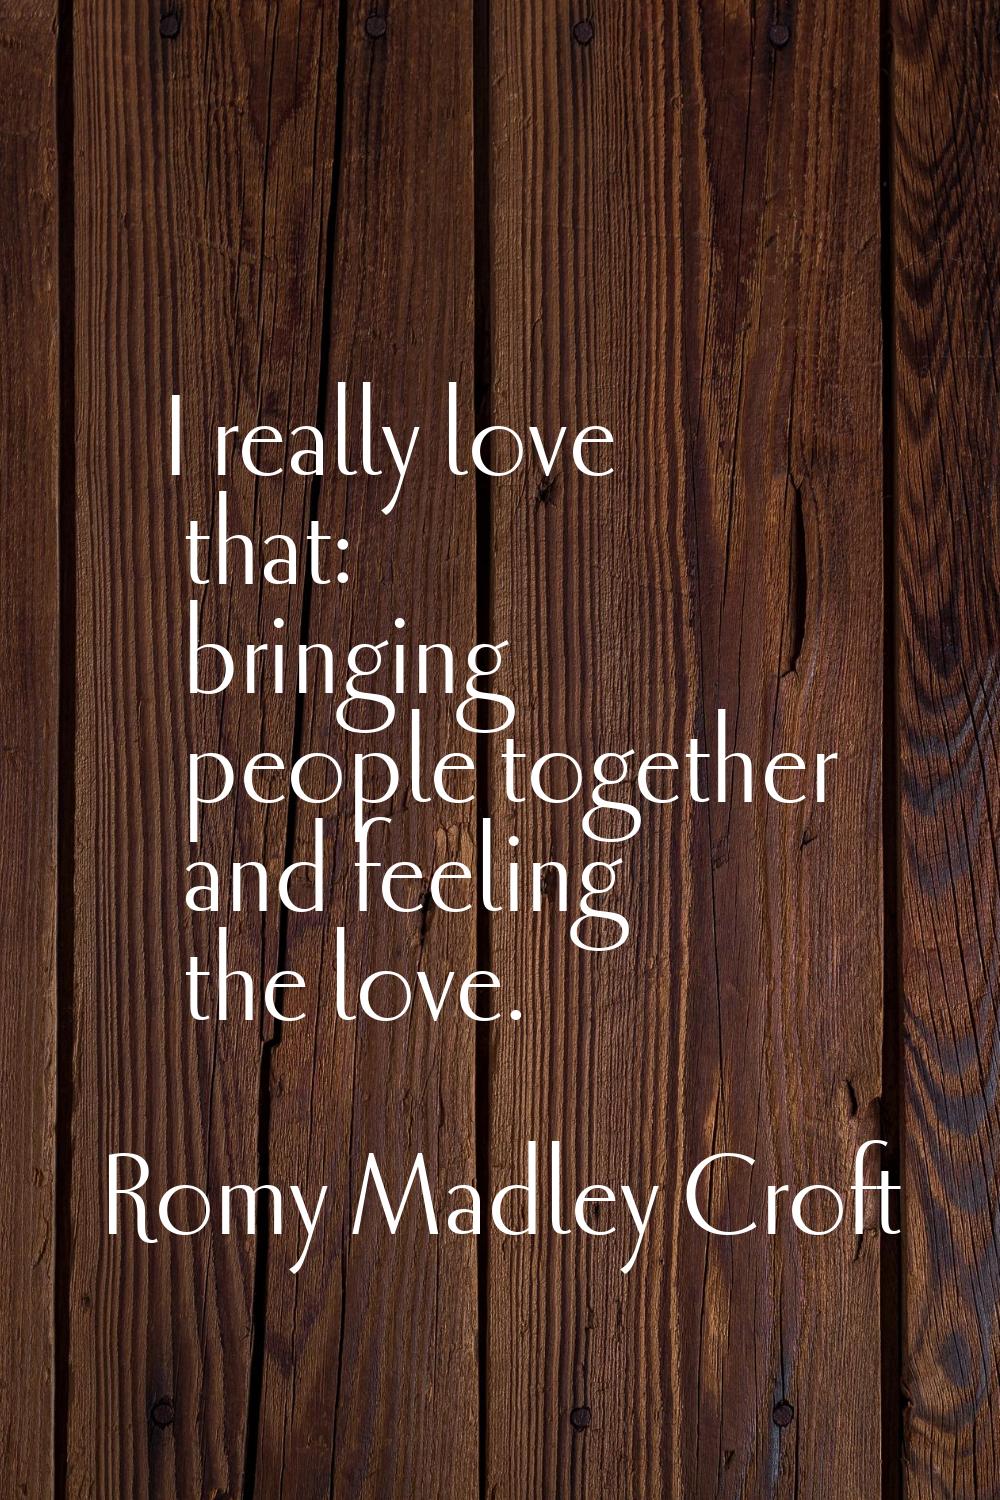 I really love that: bringing people together and feeling the love.